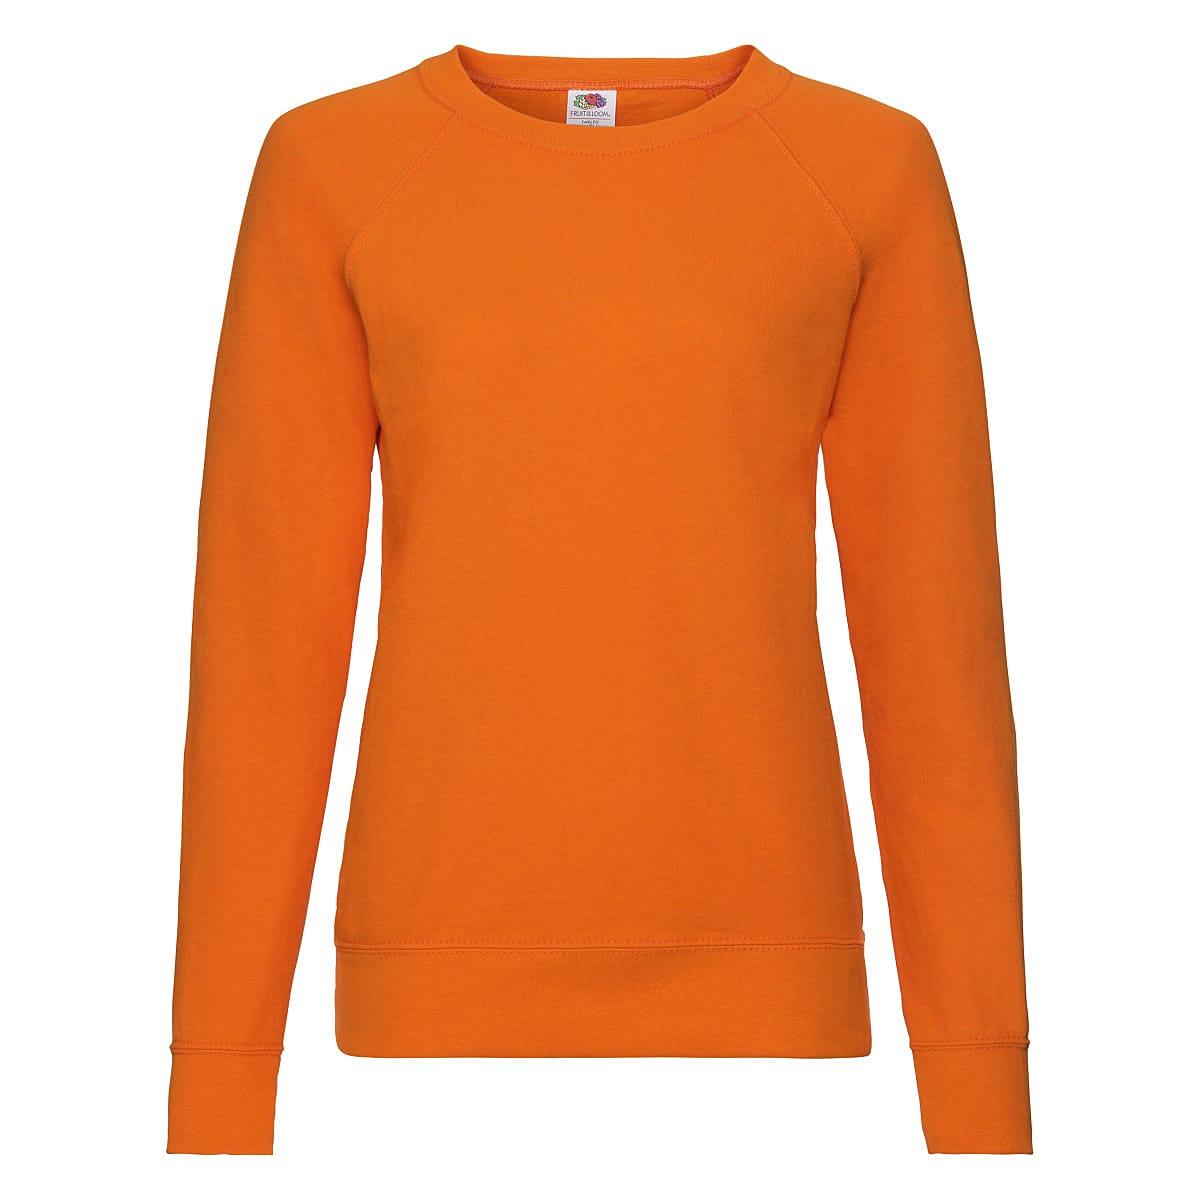 Fruit Of The Loom Lady-Fit Lightweight Raglan Sweater in Orange (Product Code: 62146)